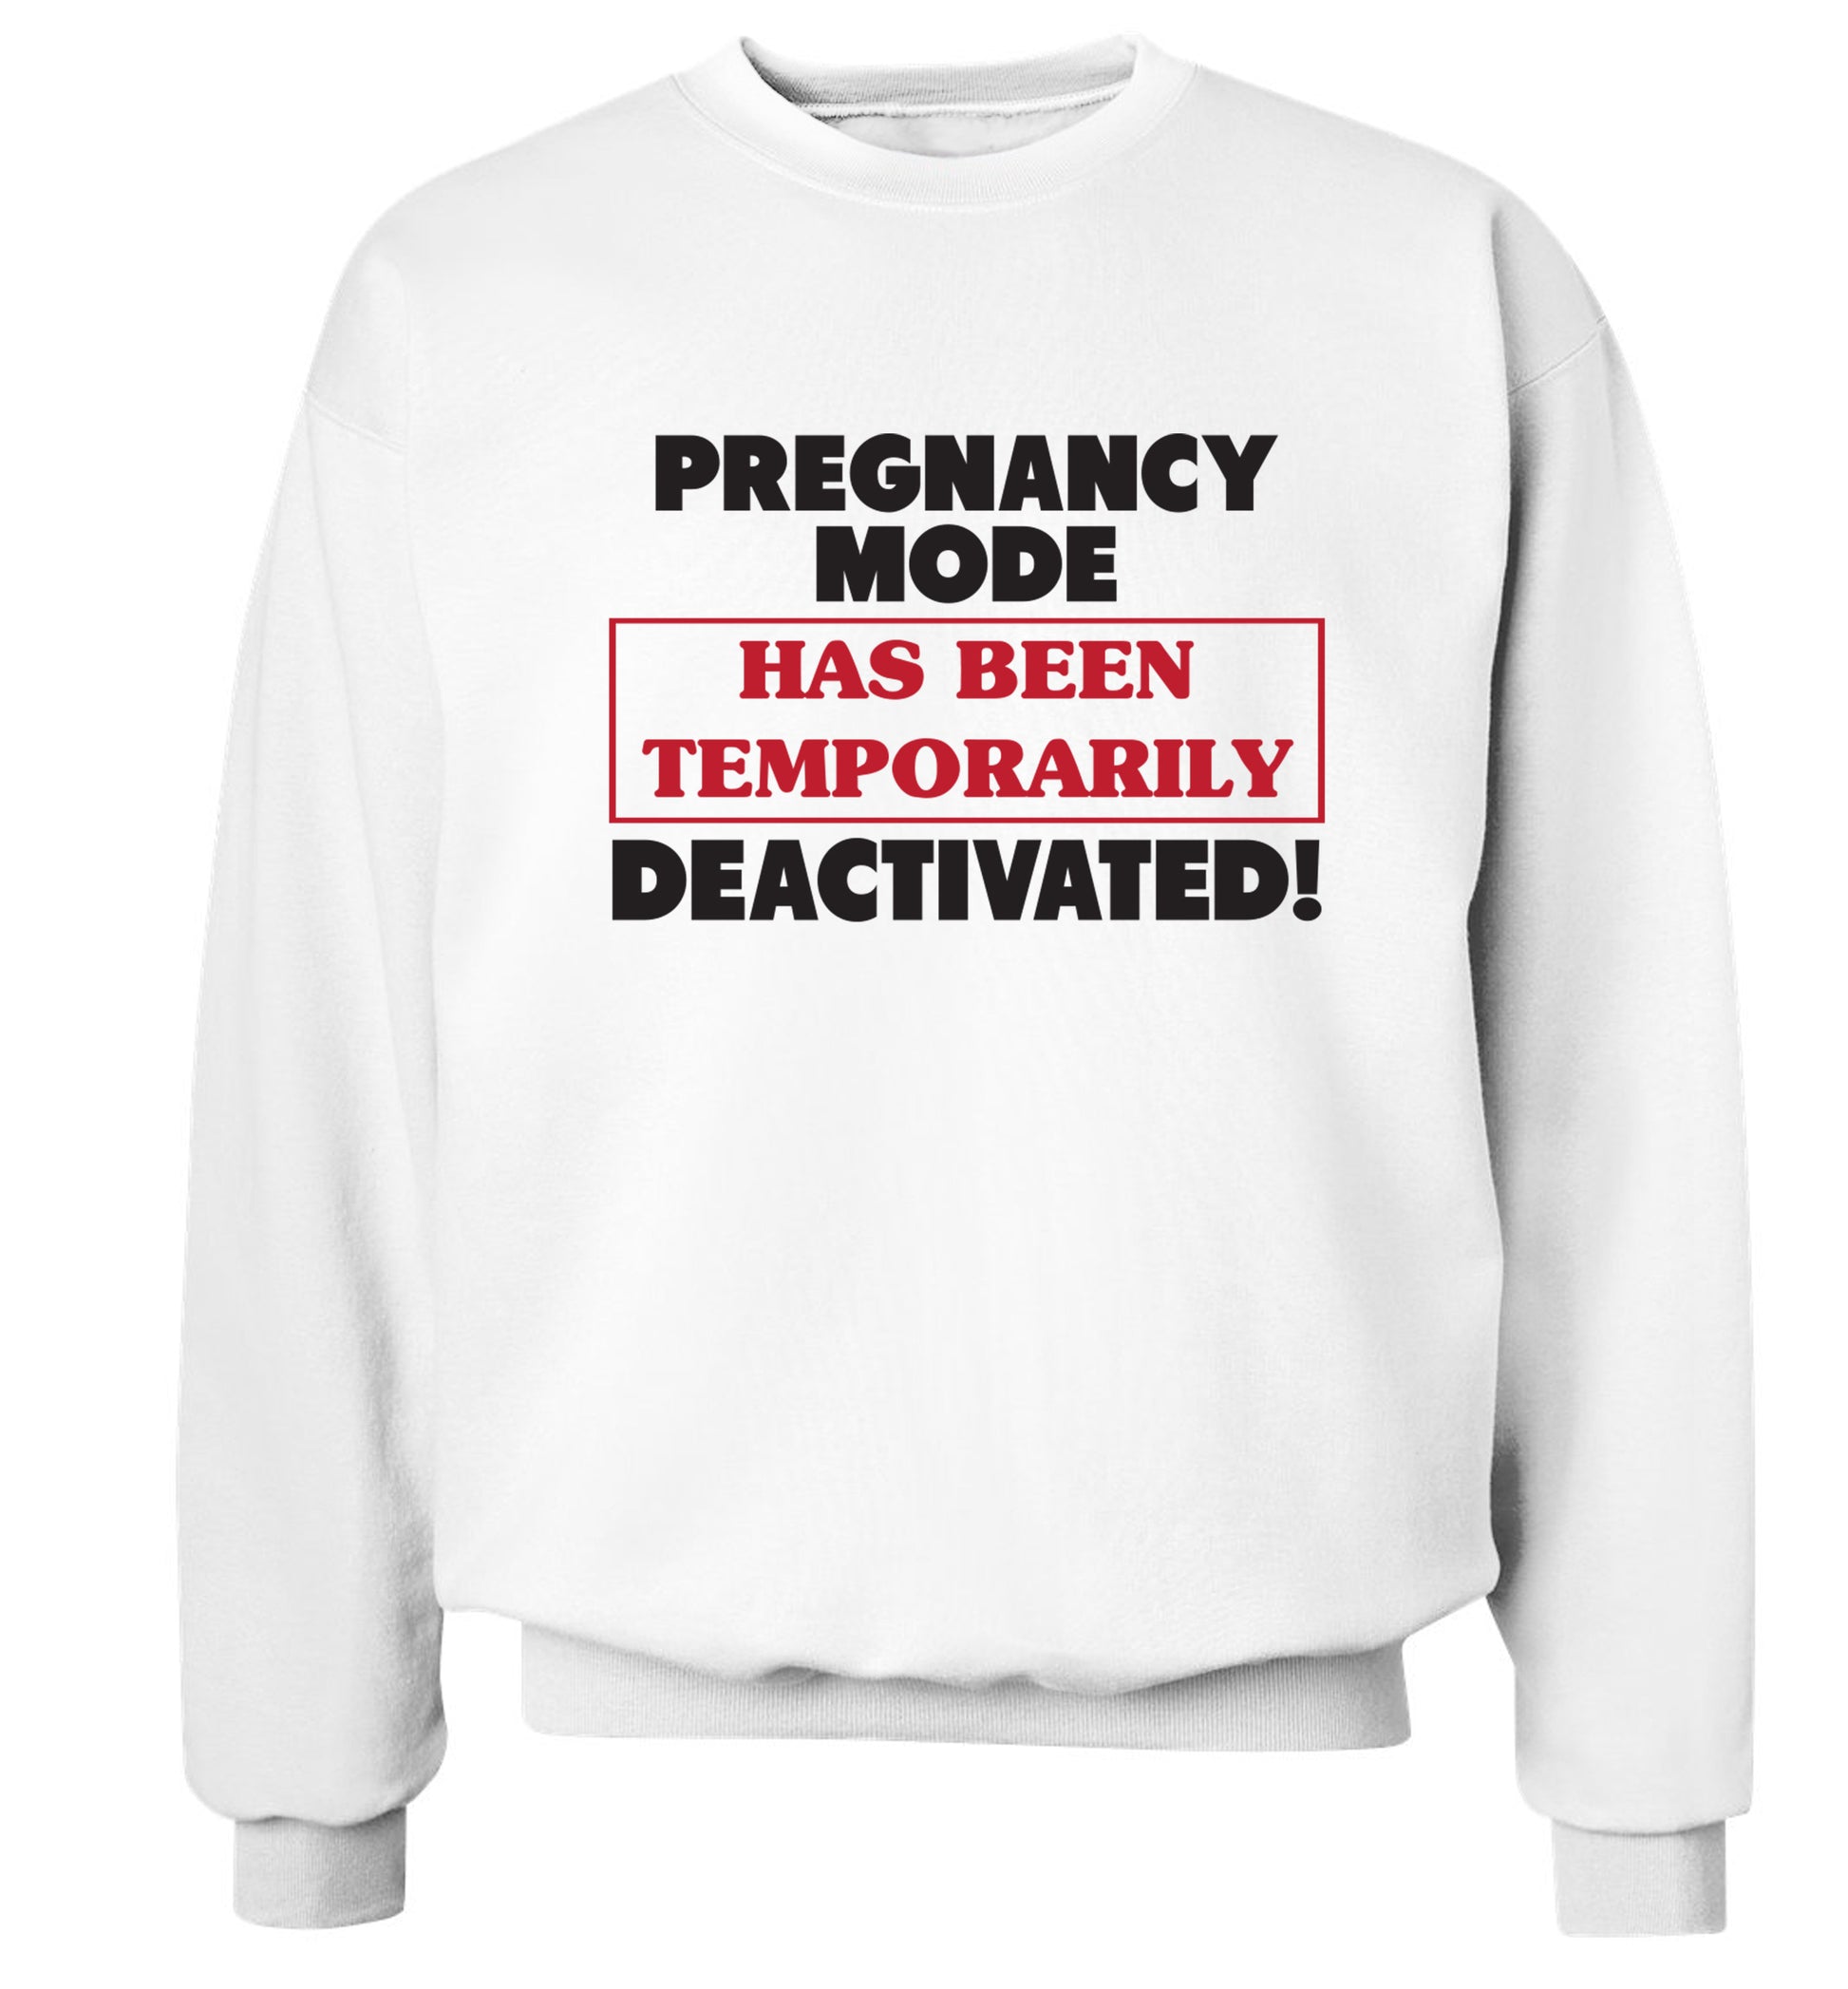 Pregnancy mode has now been temporarily deactivated Adult's unisex white Sweater 2XL